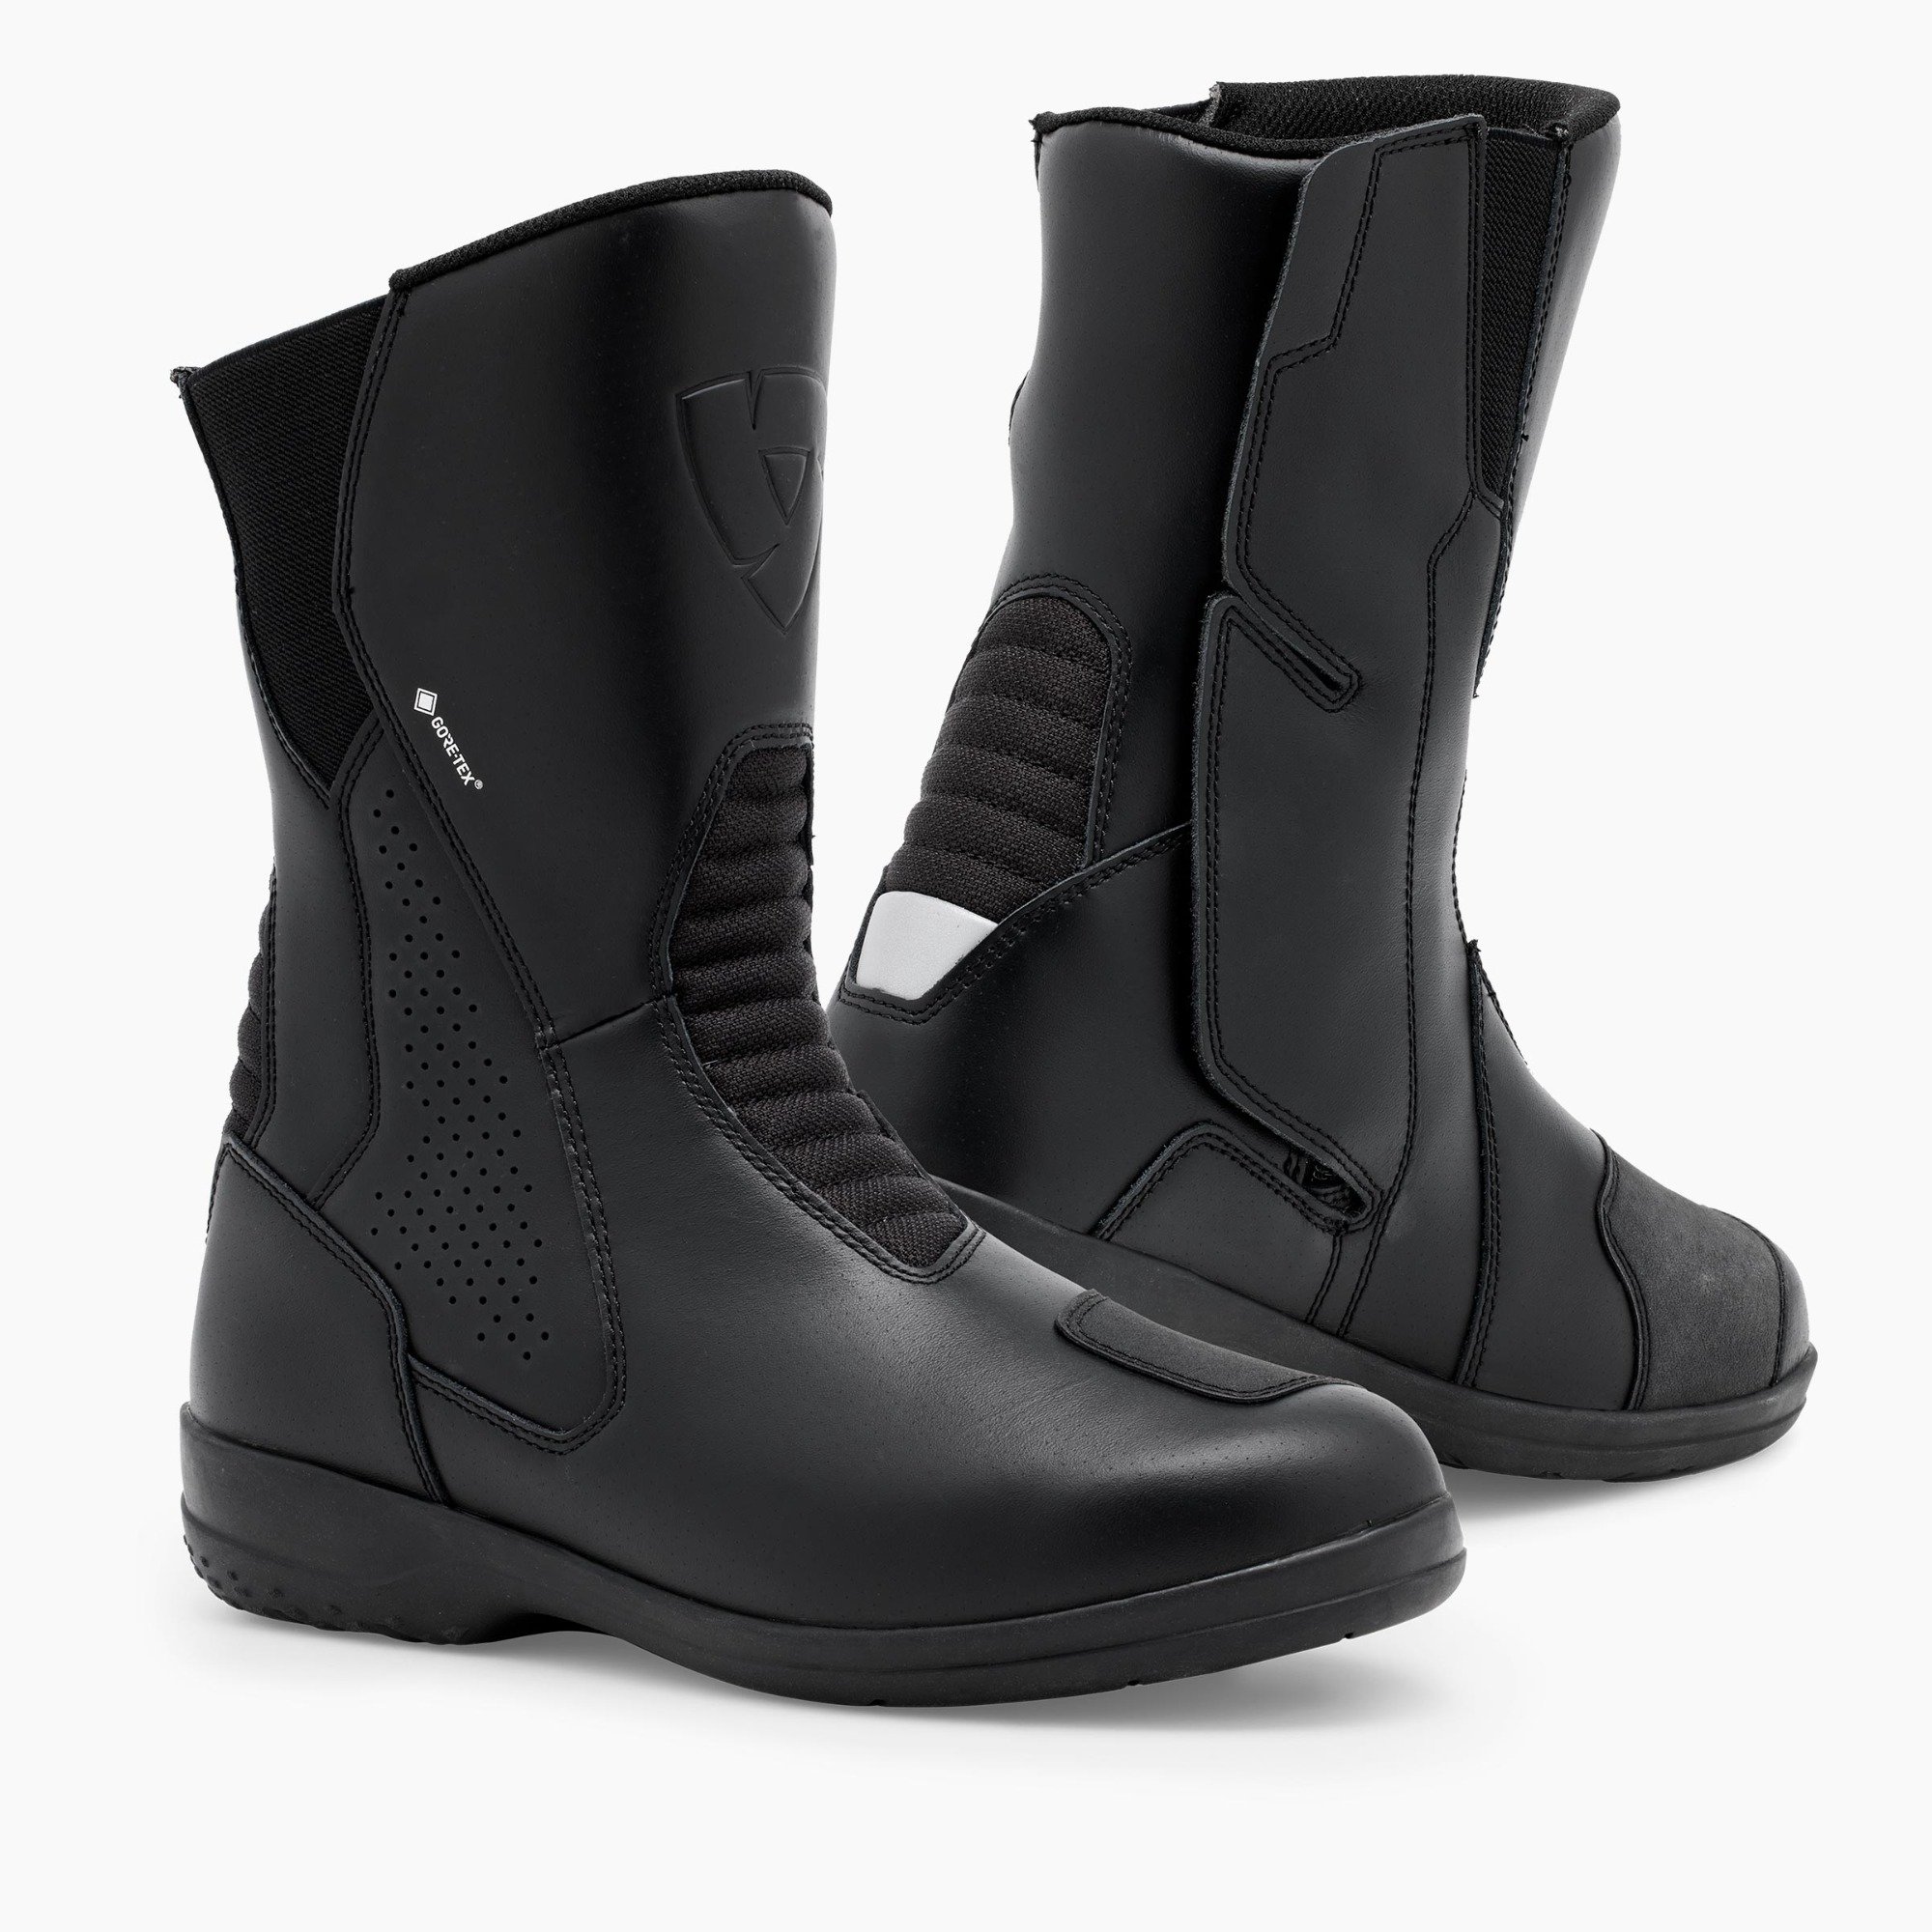 Image of REV'IT! Arena GTX Boots Lady Black Size 39 ID 8700001356992